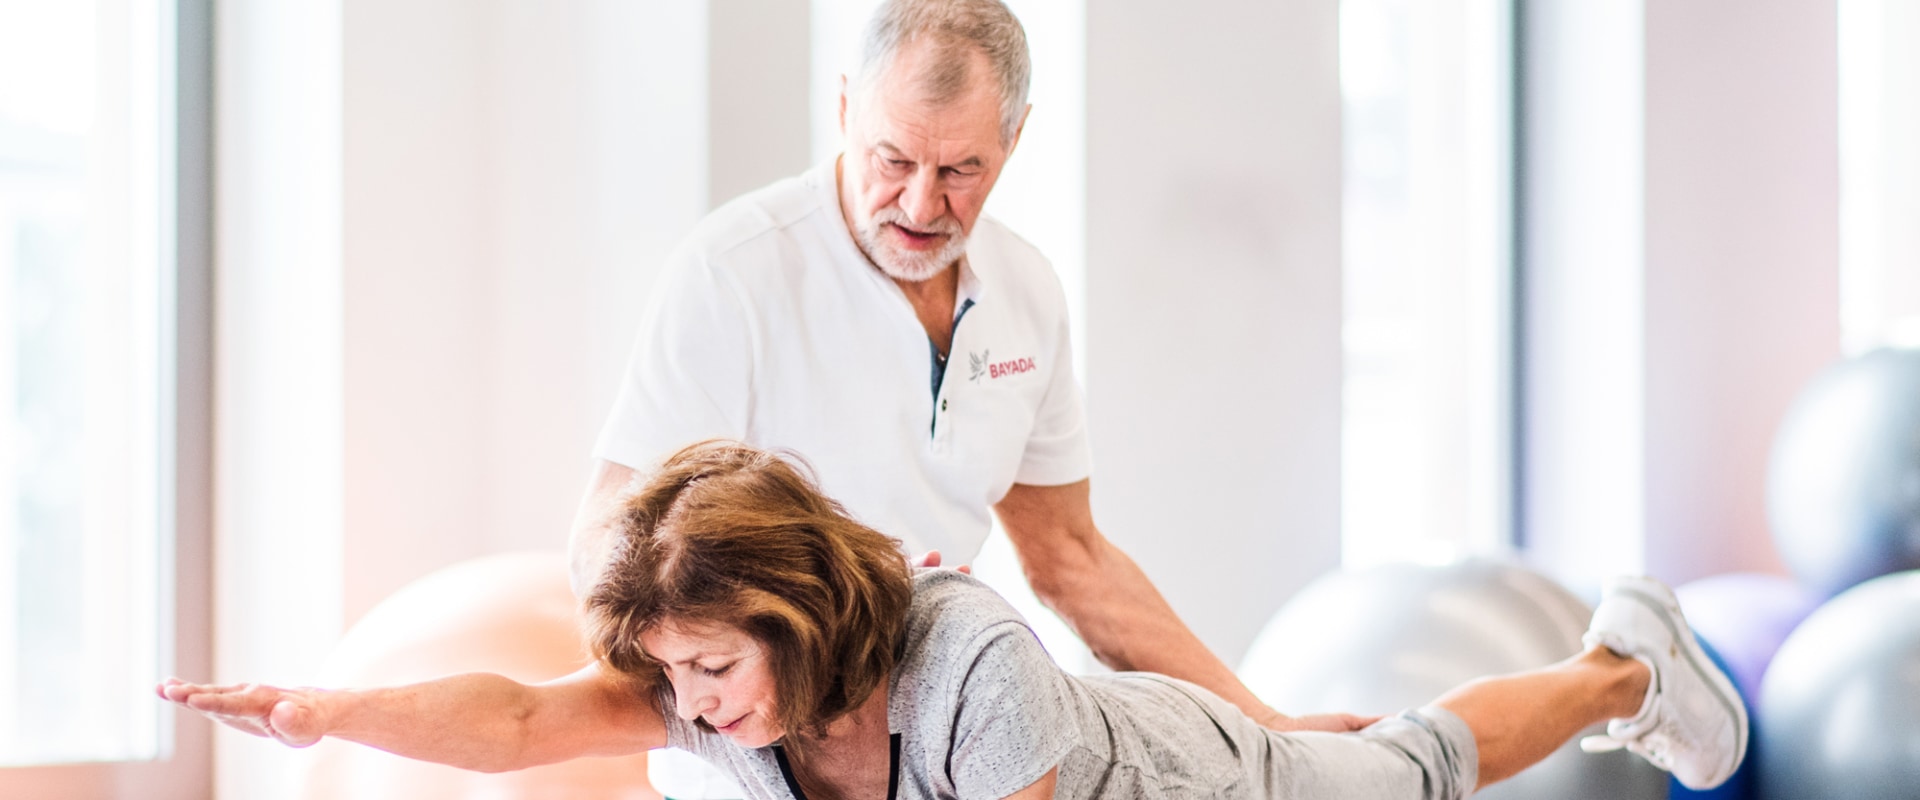 What to Expect During a Physical Therapy Session